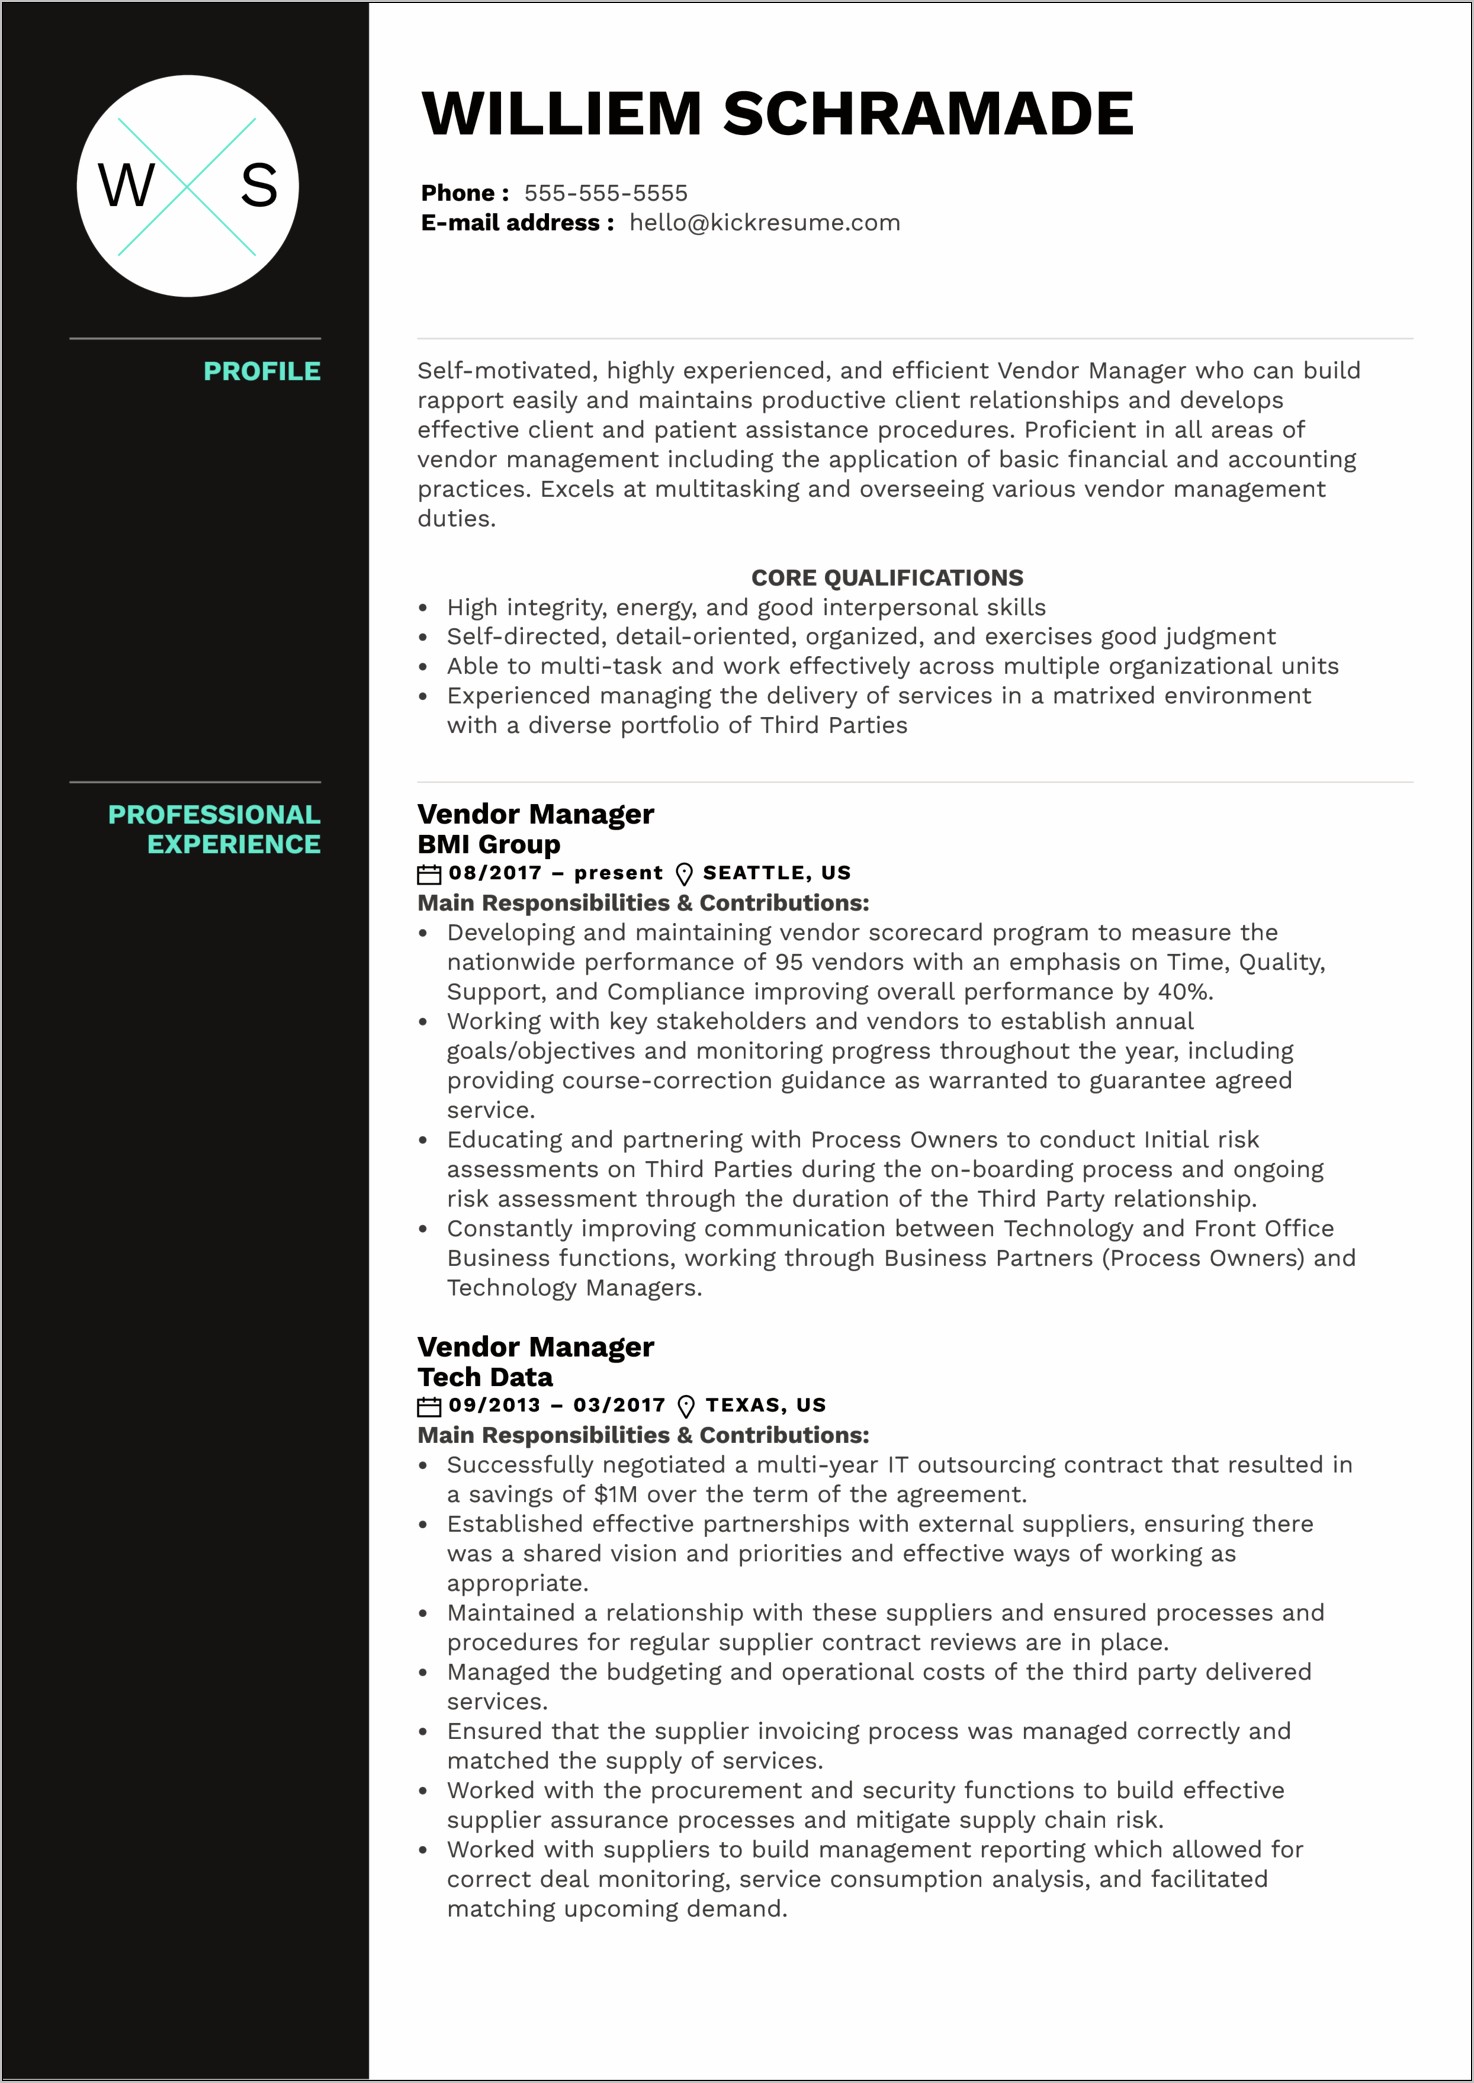 Professional Summary On Manager's Resume